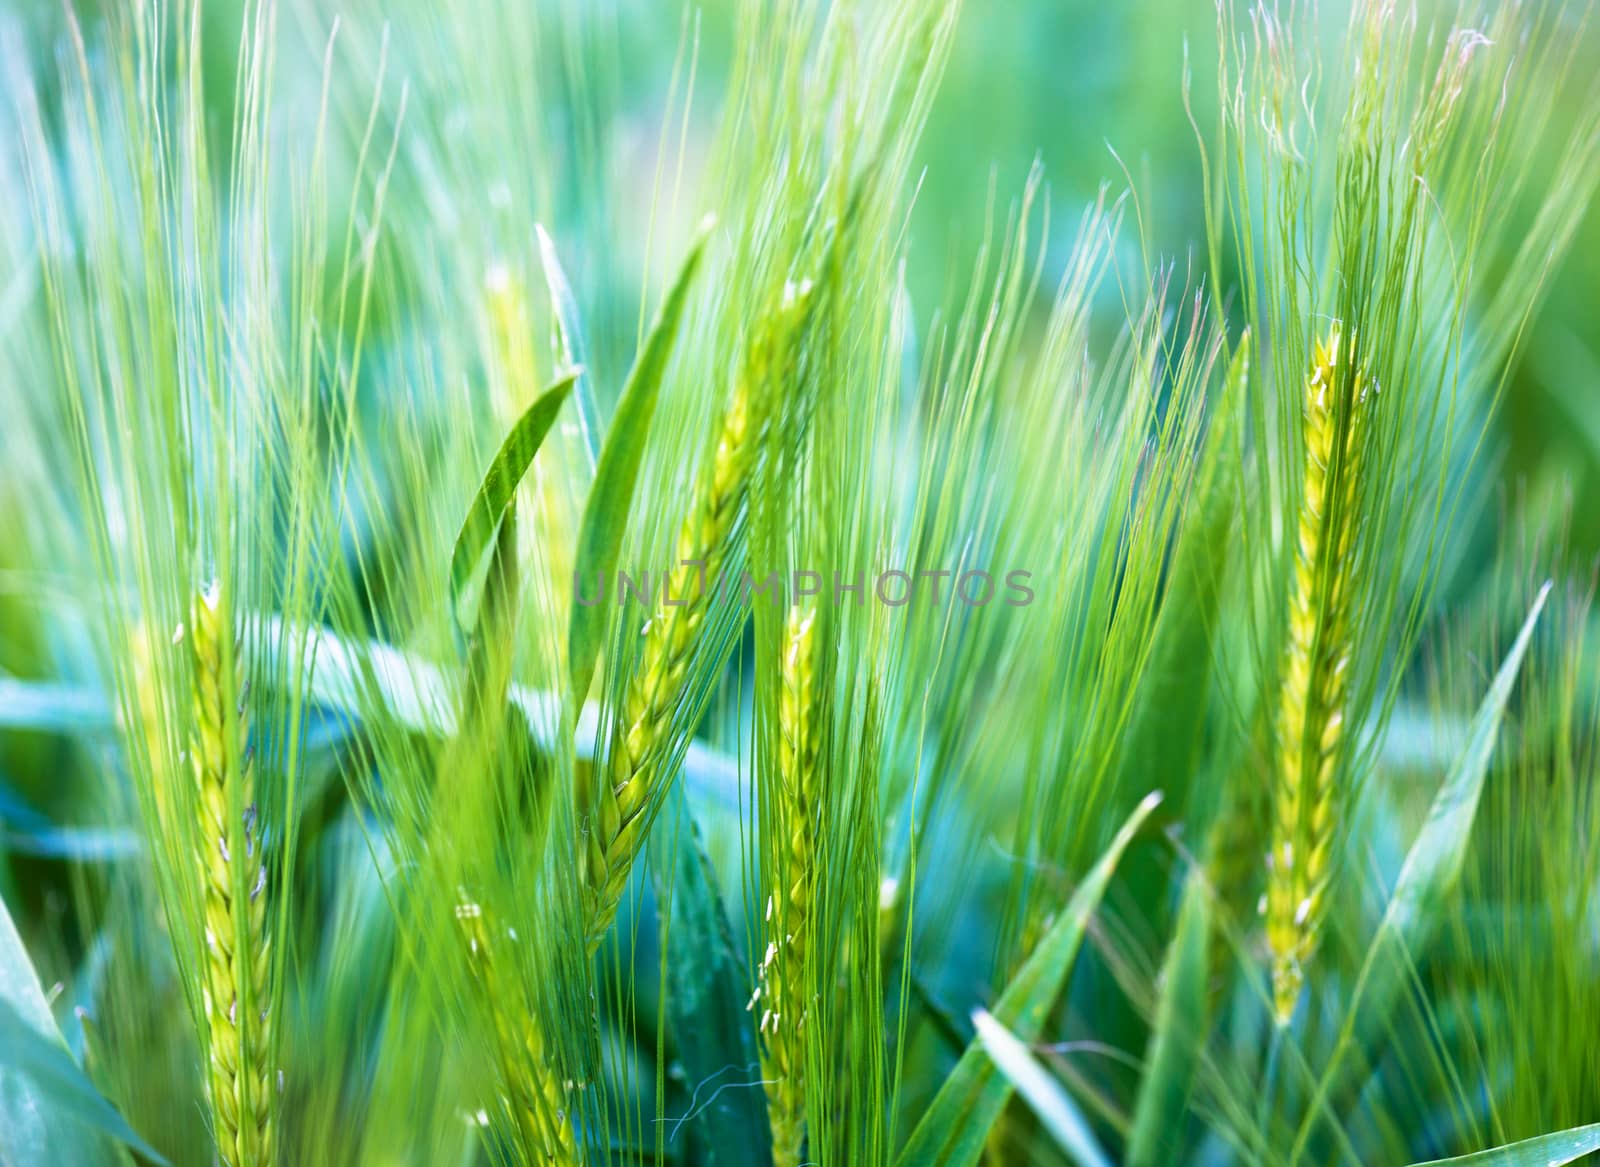 Ear of wheat - soft background